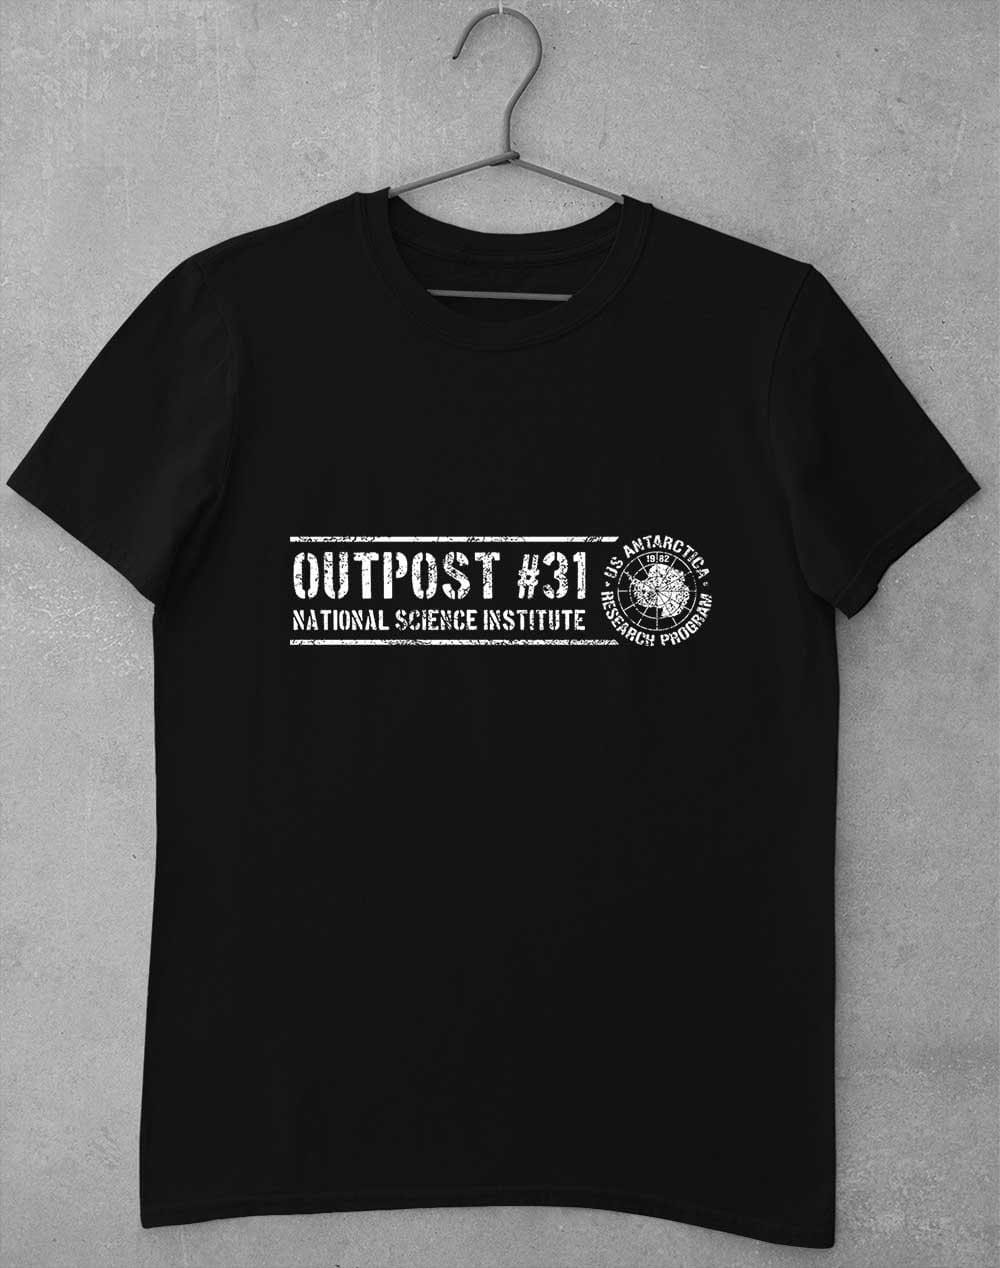 Outpost 31 Antarctica T-Shirt S / Black  - Off World Tees